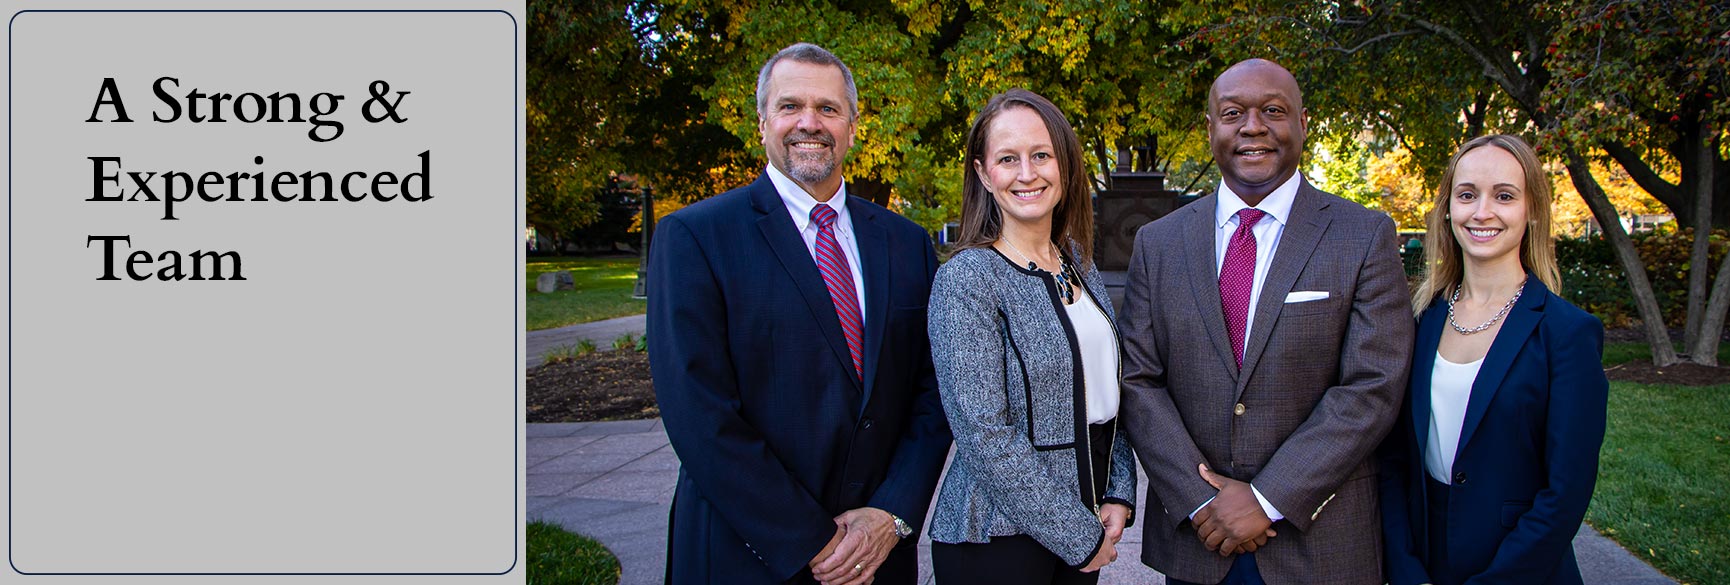 "A Strong & Experienced Team." Government Advantage Group Staff. Left to right: partners Kevin Futryk, Amanda Sines and John Singleton, and Julia Wynn, Director of Government Affairs